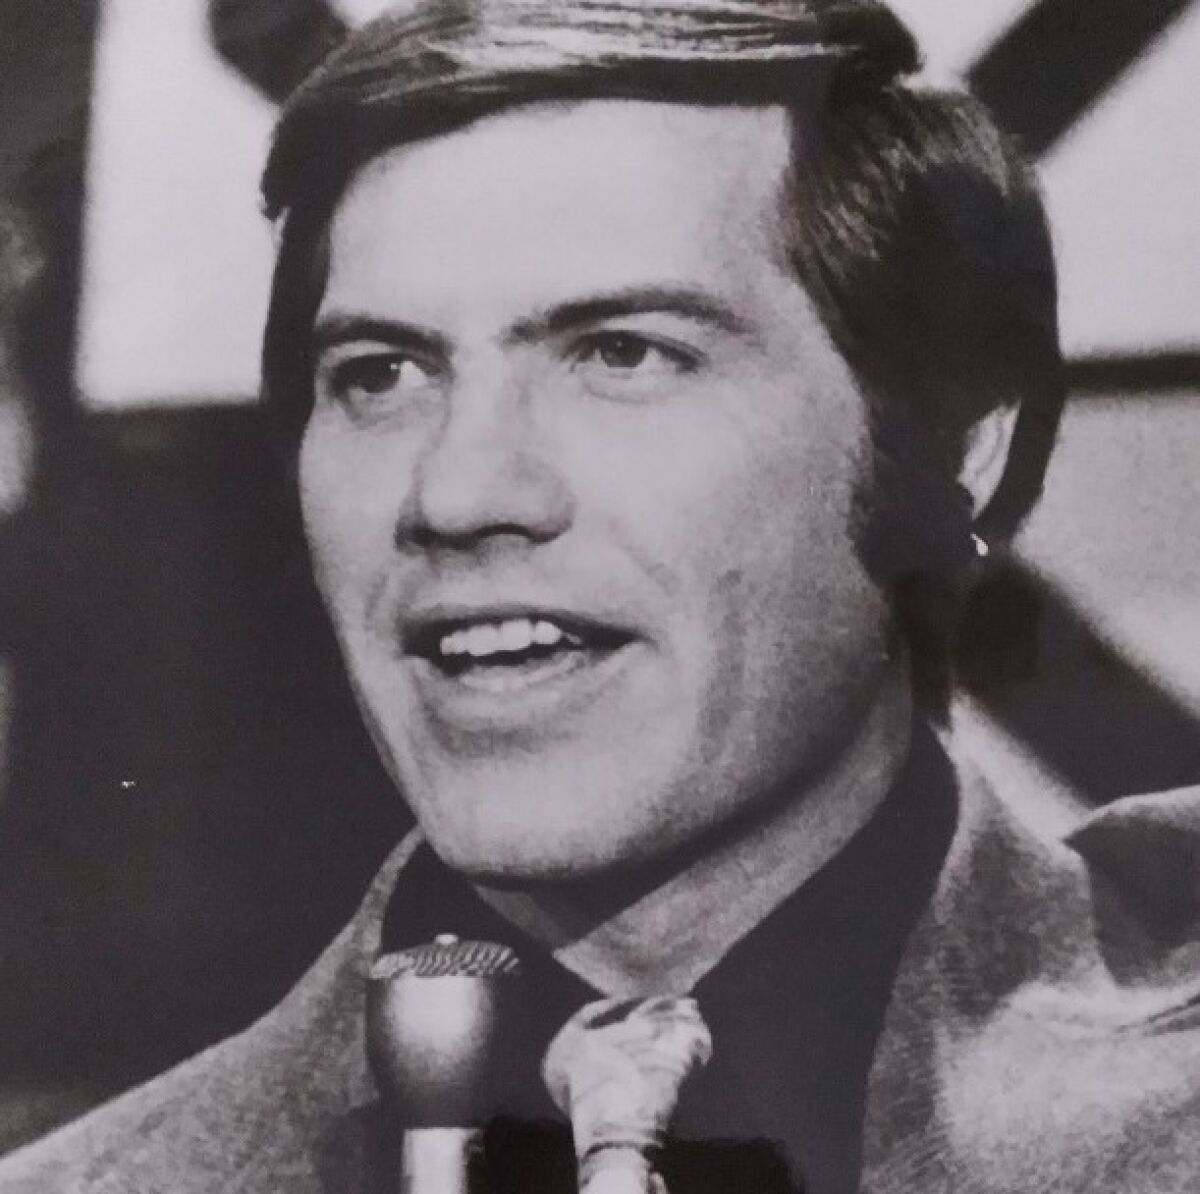 A close-up of Sam Riddle in a suit, holding a microphone.